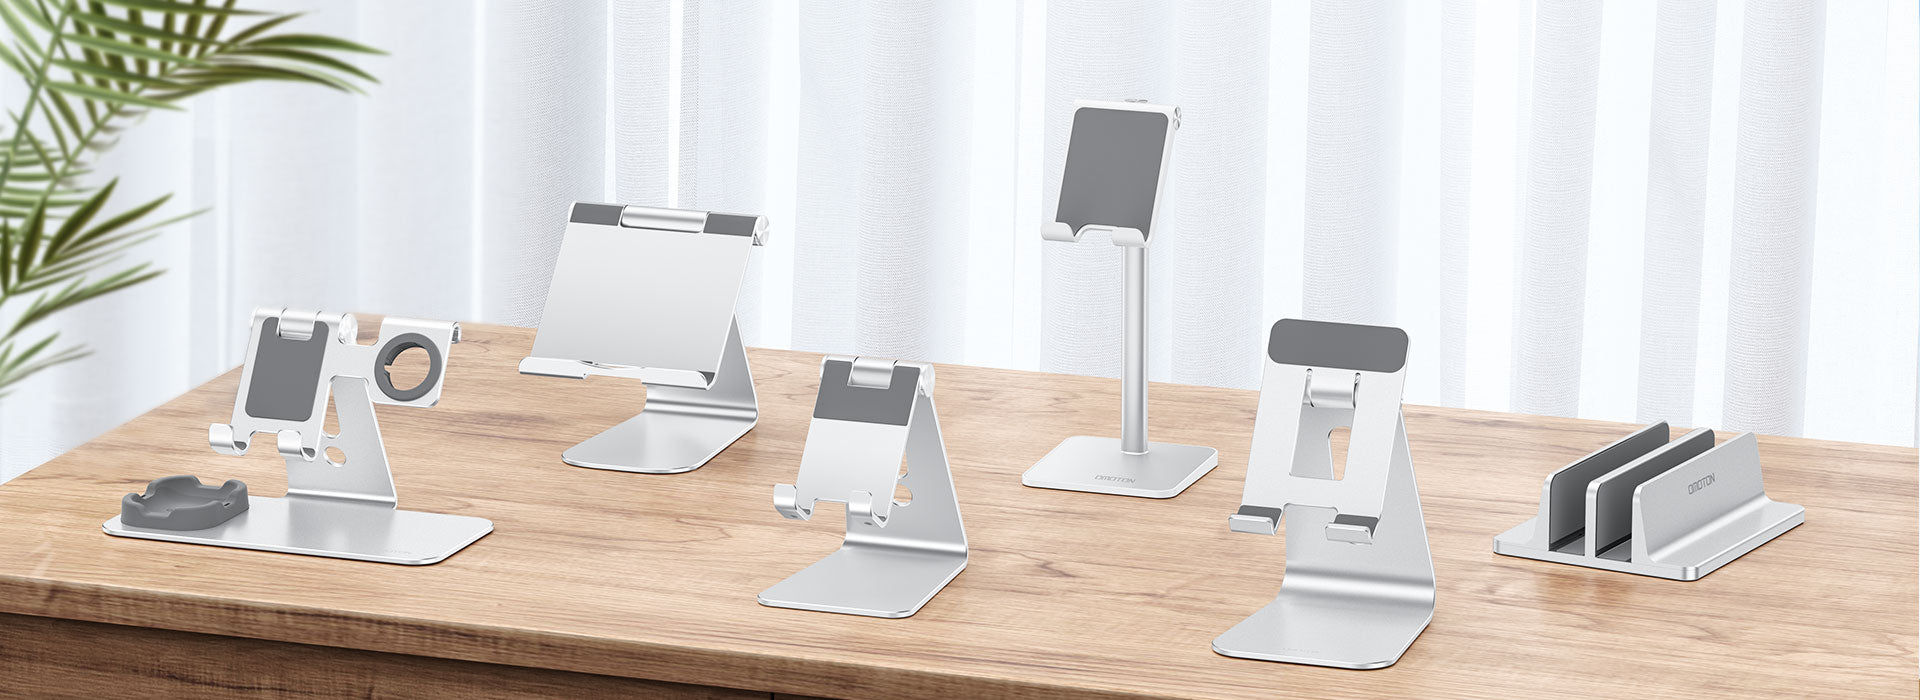 What Are the Different Types of Phone Stands and Which Is Best for You?